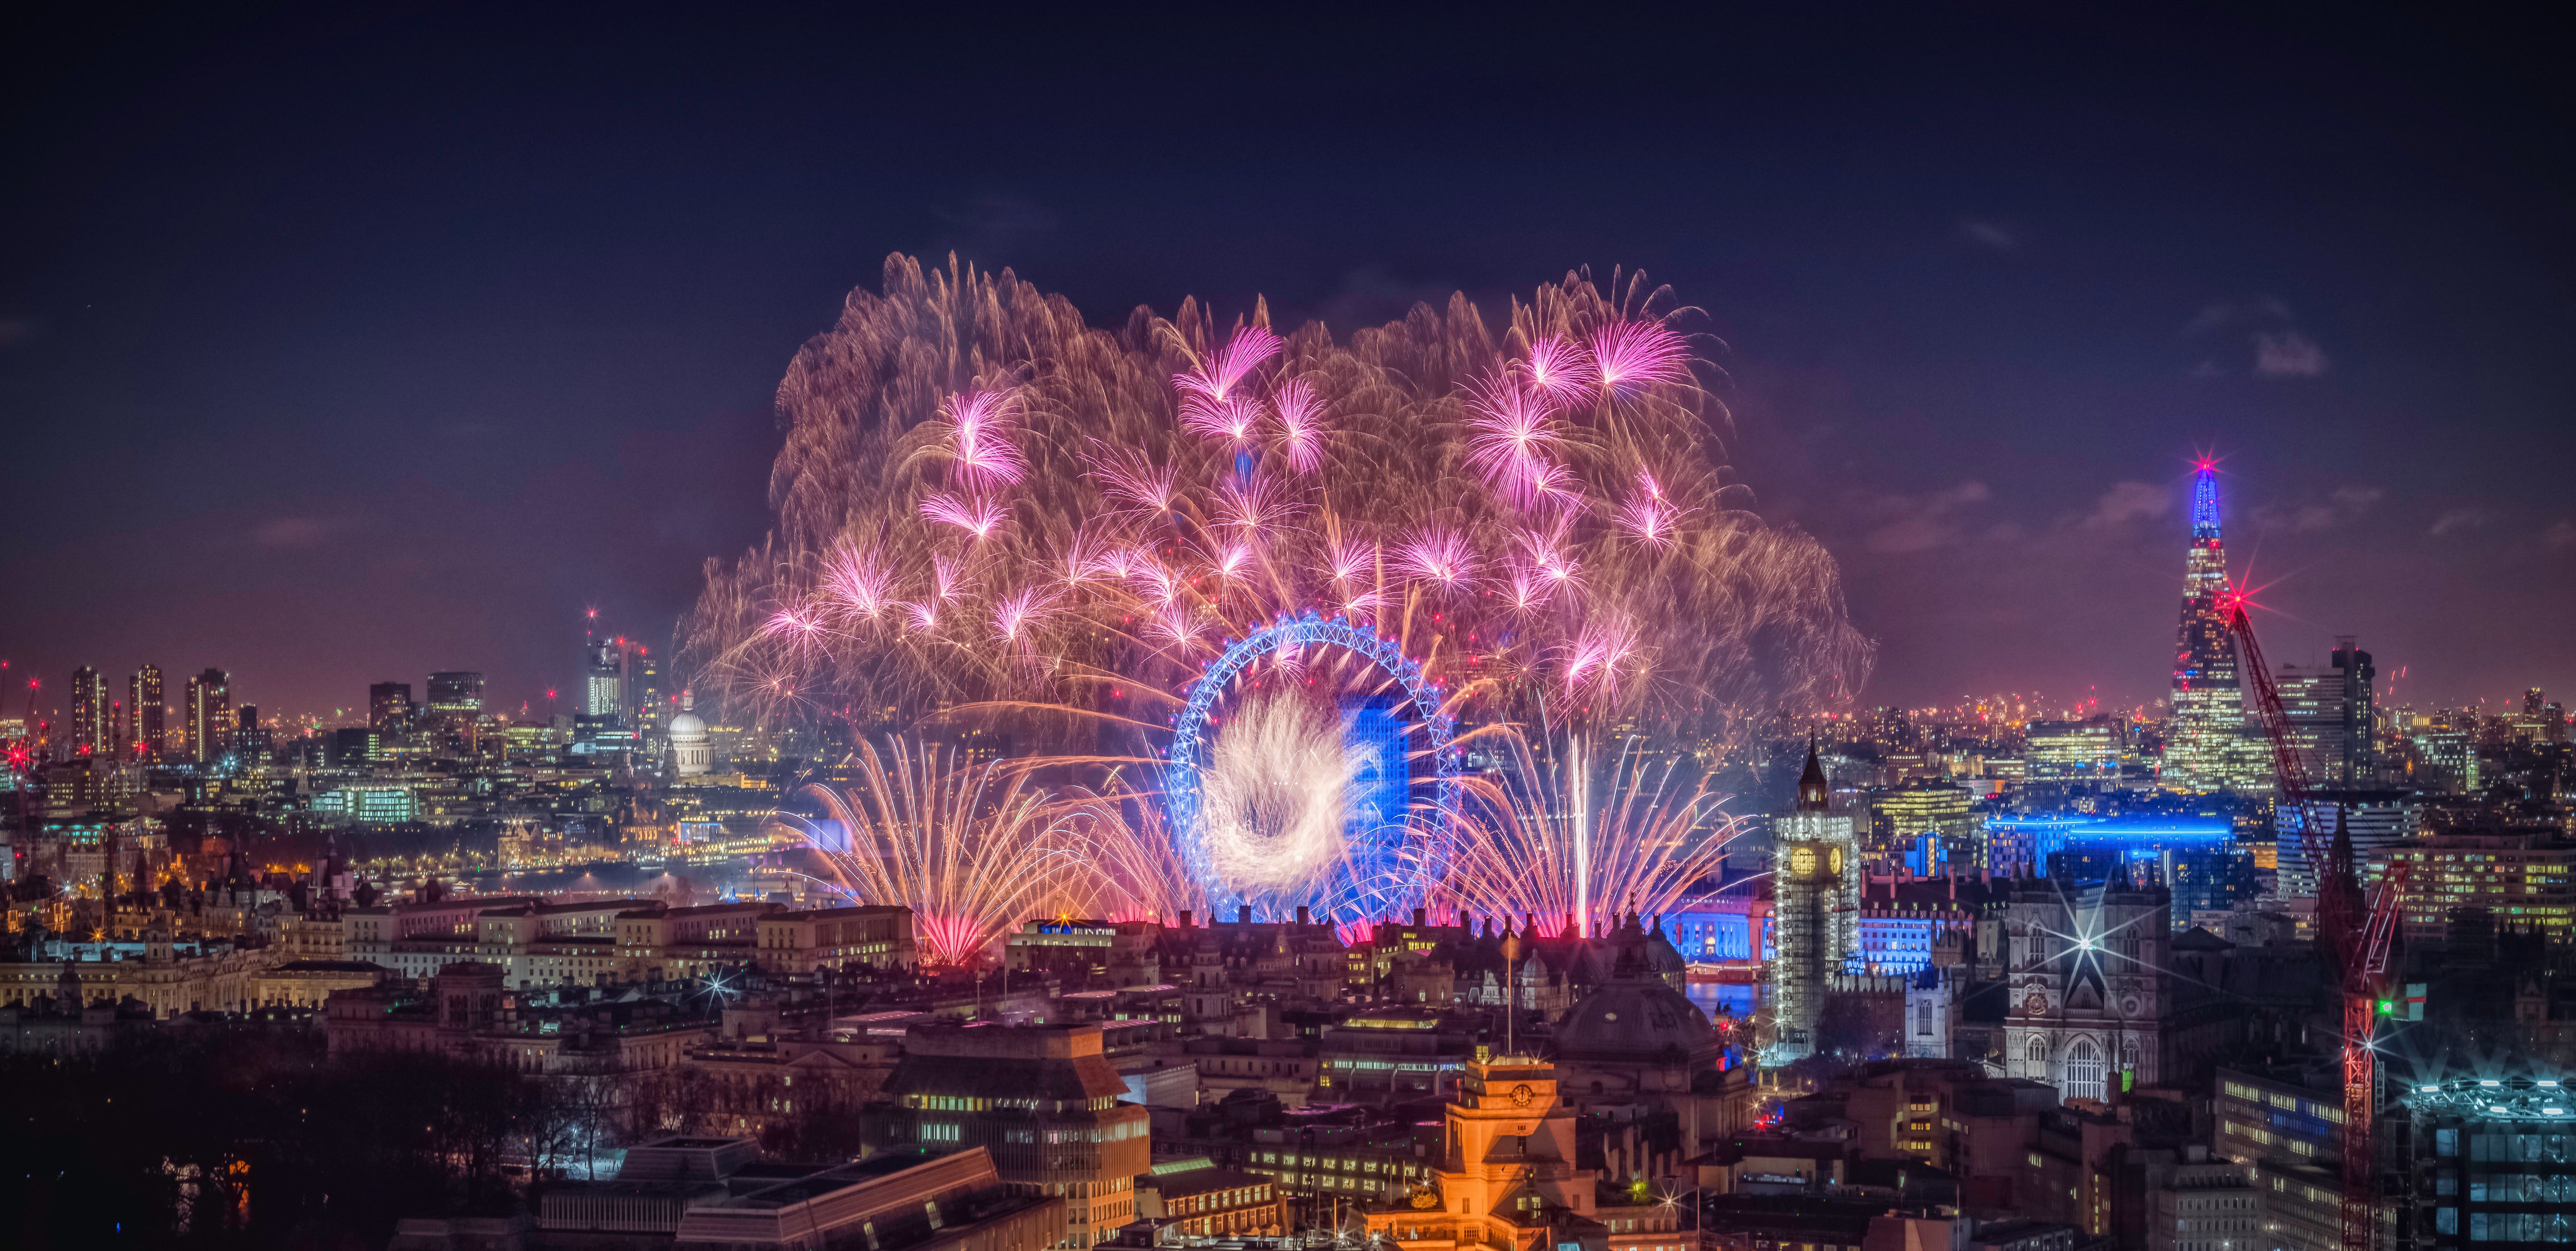 New year’s fireworks in London: a time of celebration and for Will Gore to firmly shut his front door